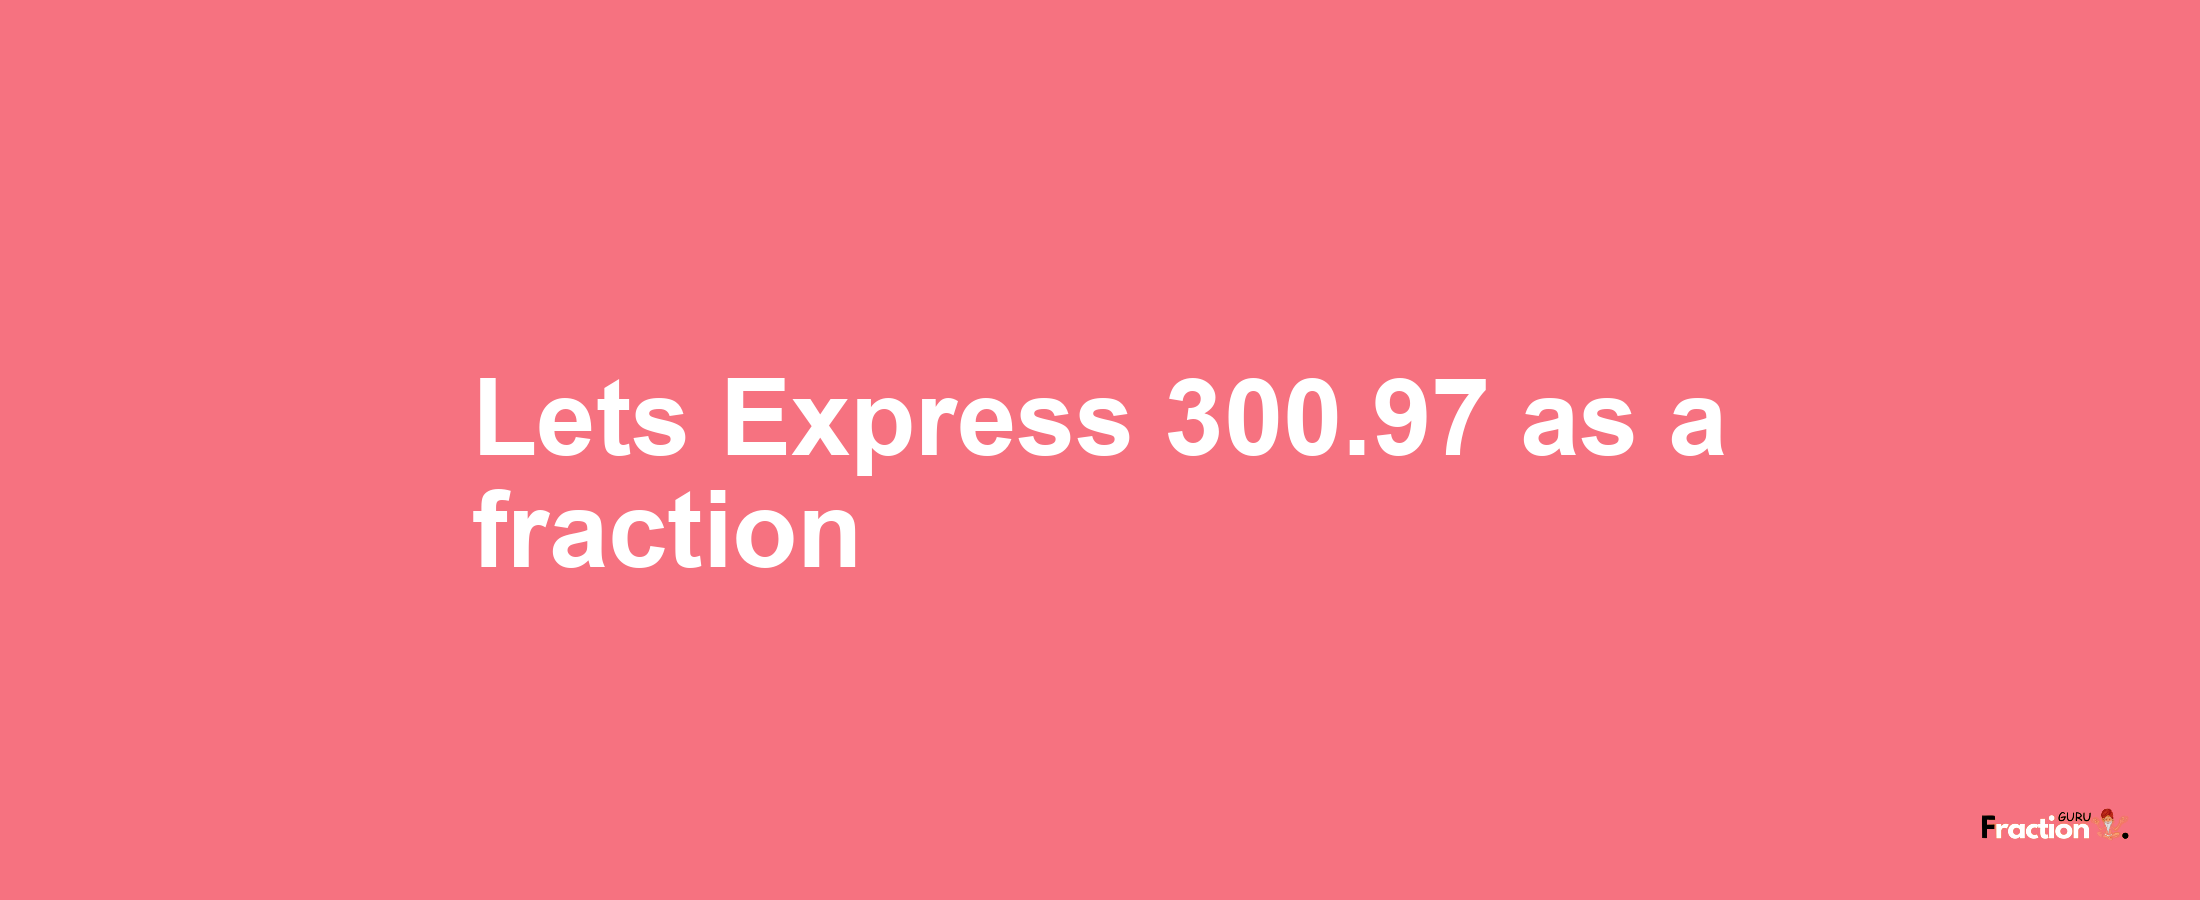 Lets Express 300.97 as afraction